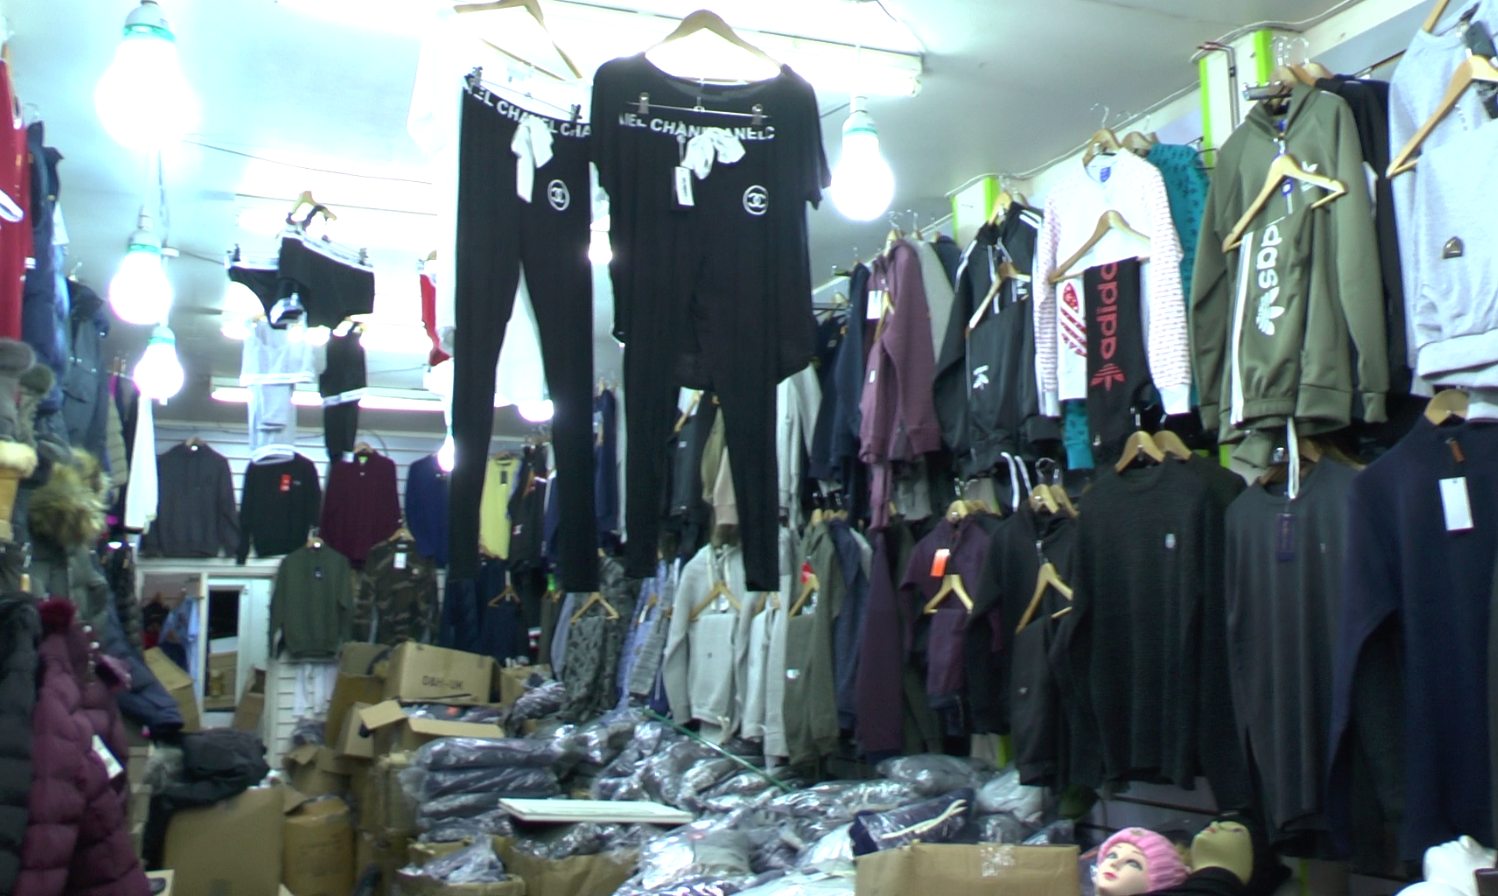 Inside premises raided by Police and Trading Standards in the Strangeways area of Manchester on December 12